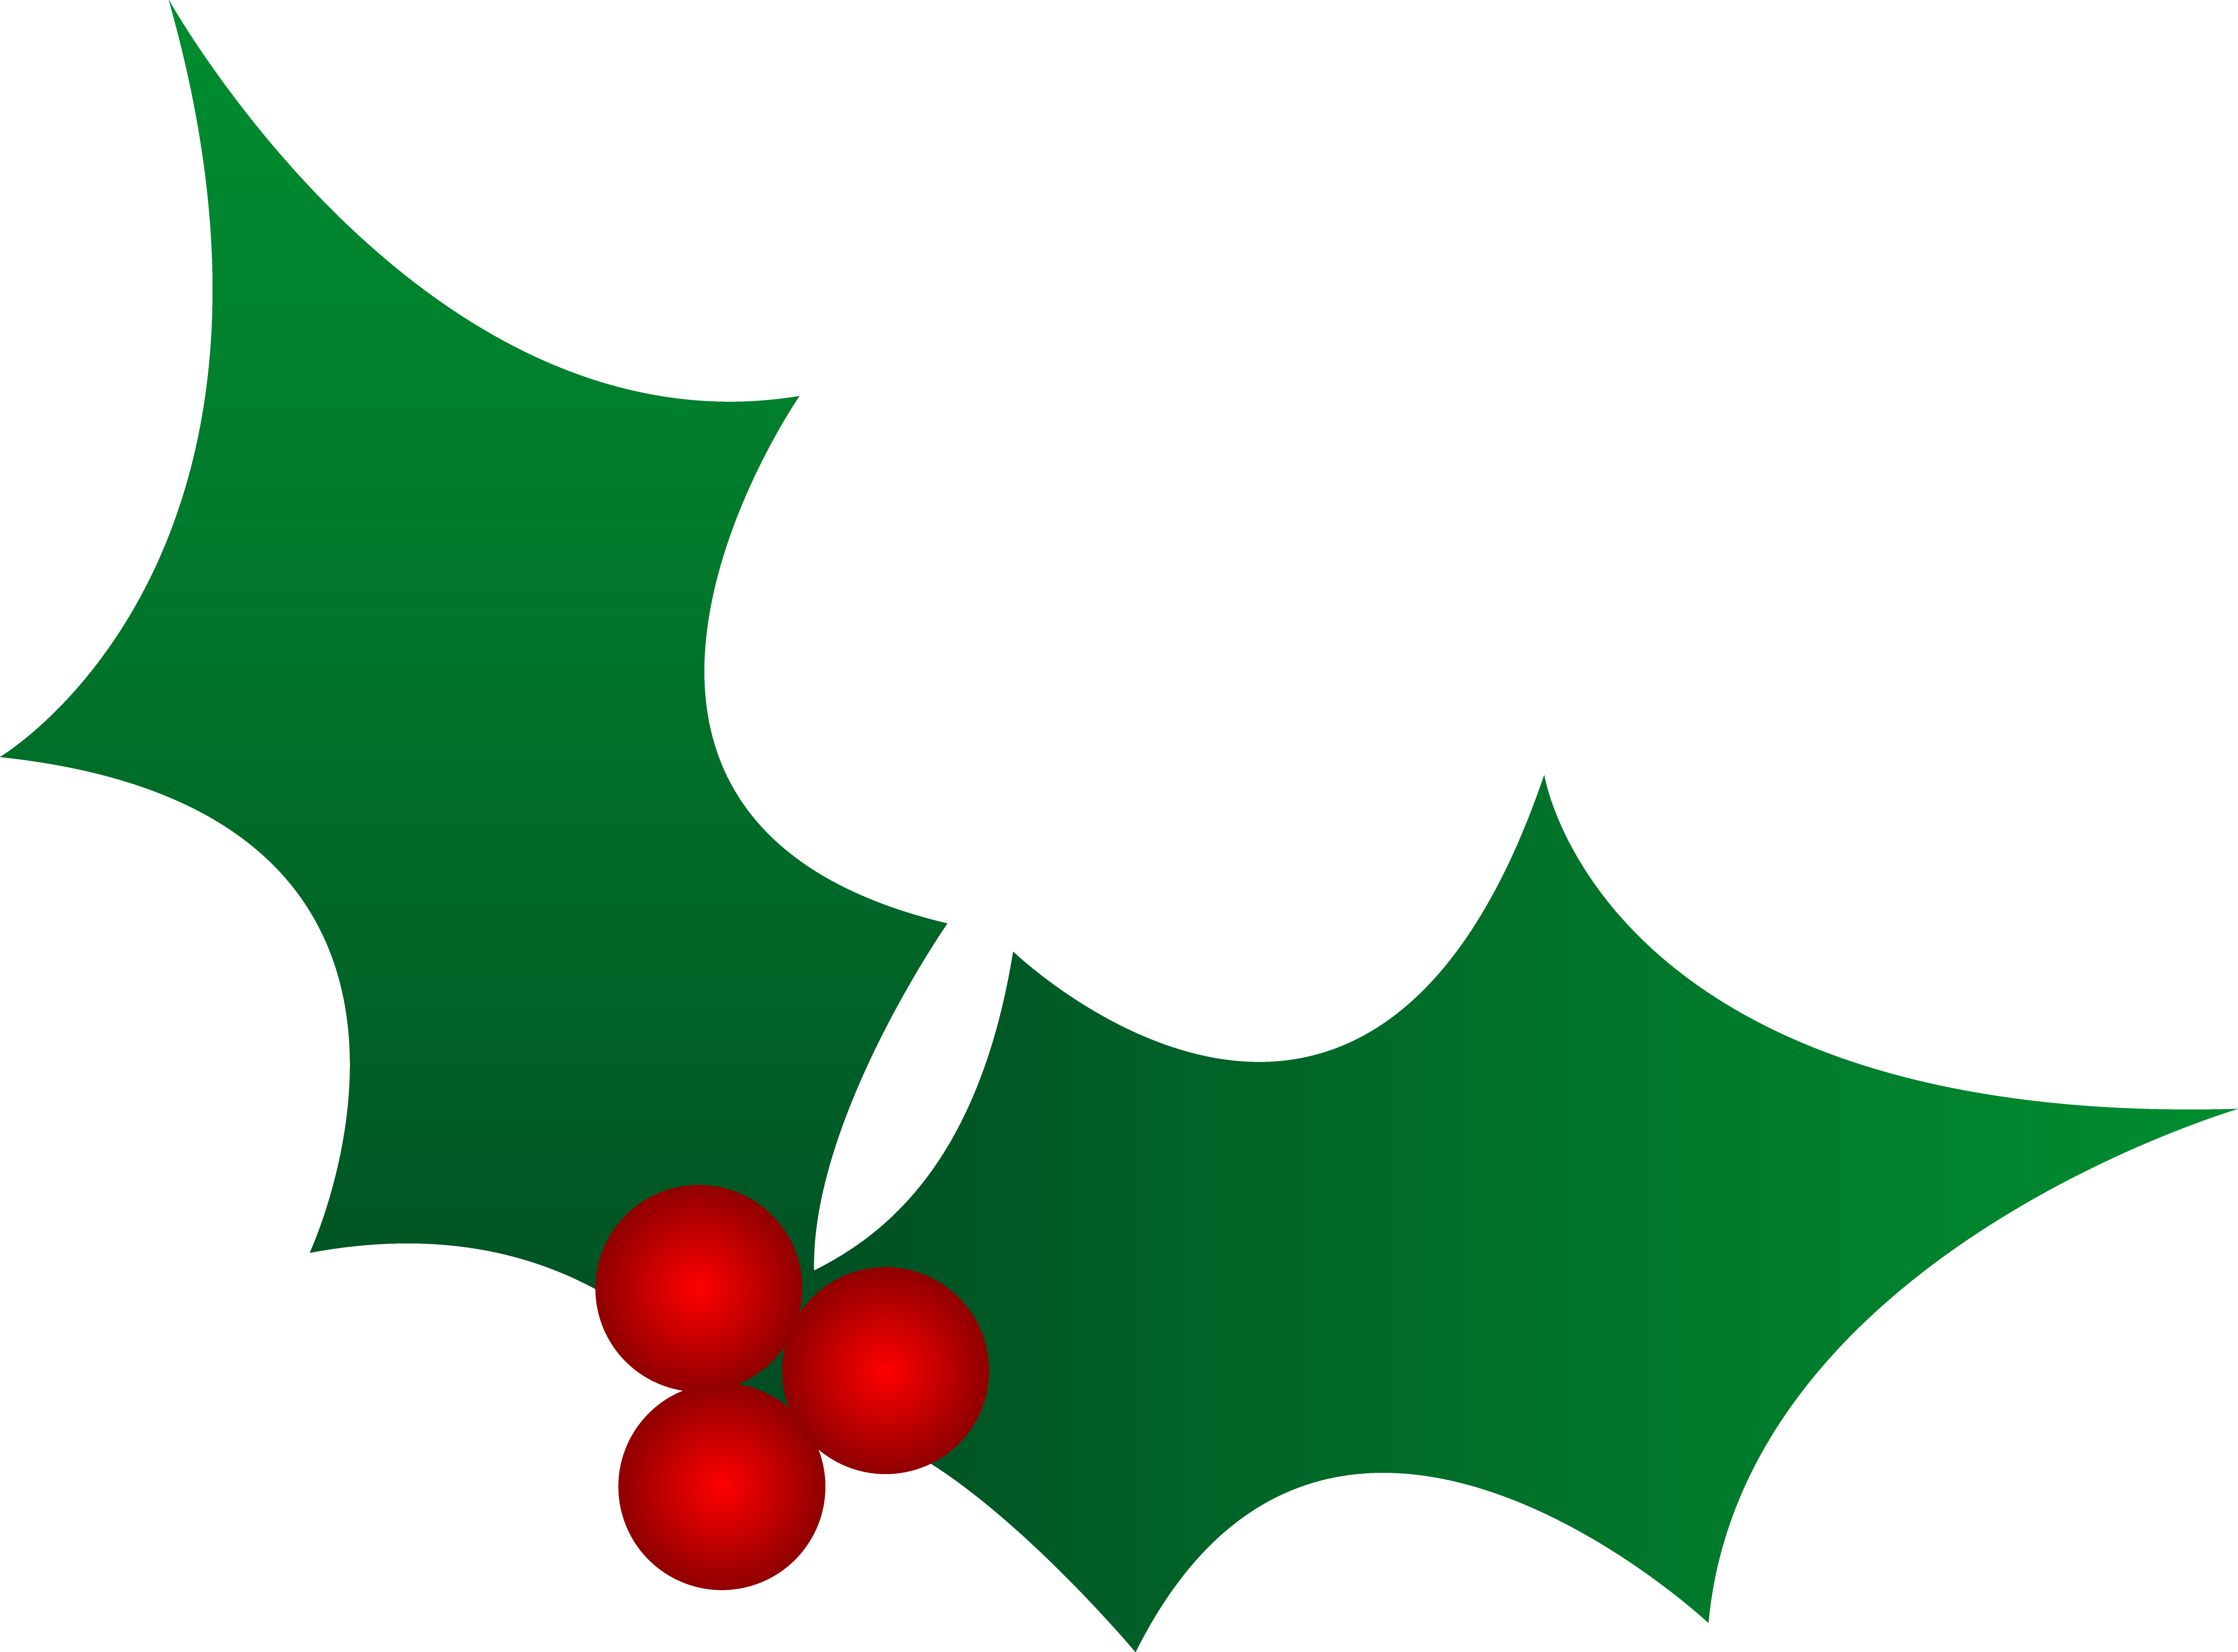 Free Holly Leaf Png Download Free Holly Leaf Png Png Images Free Cliparts On Clipart Library